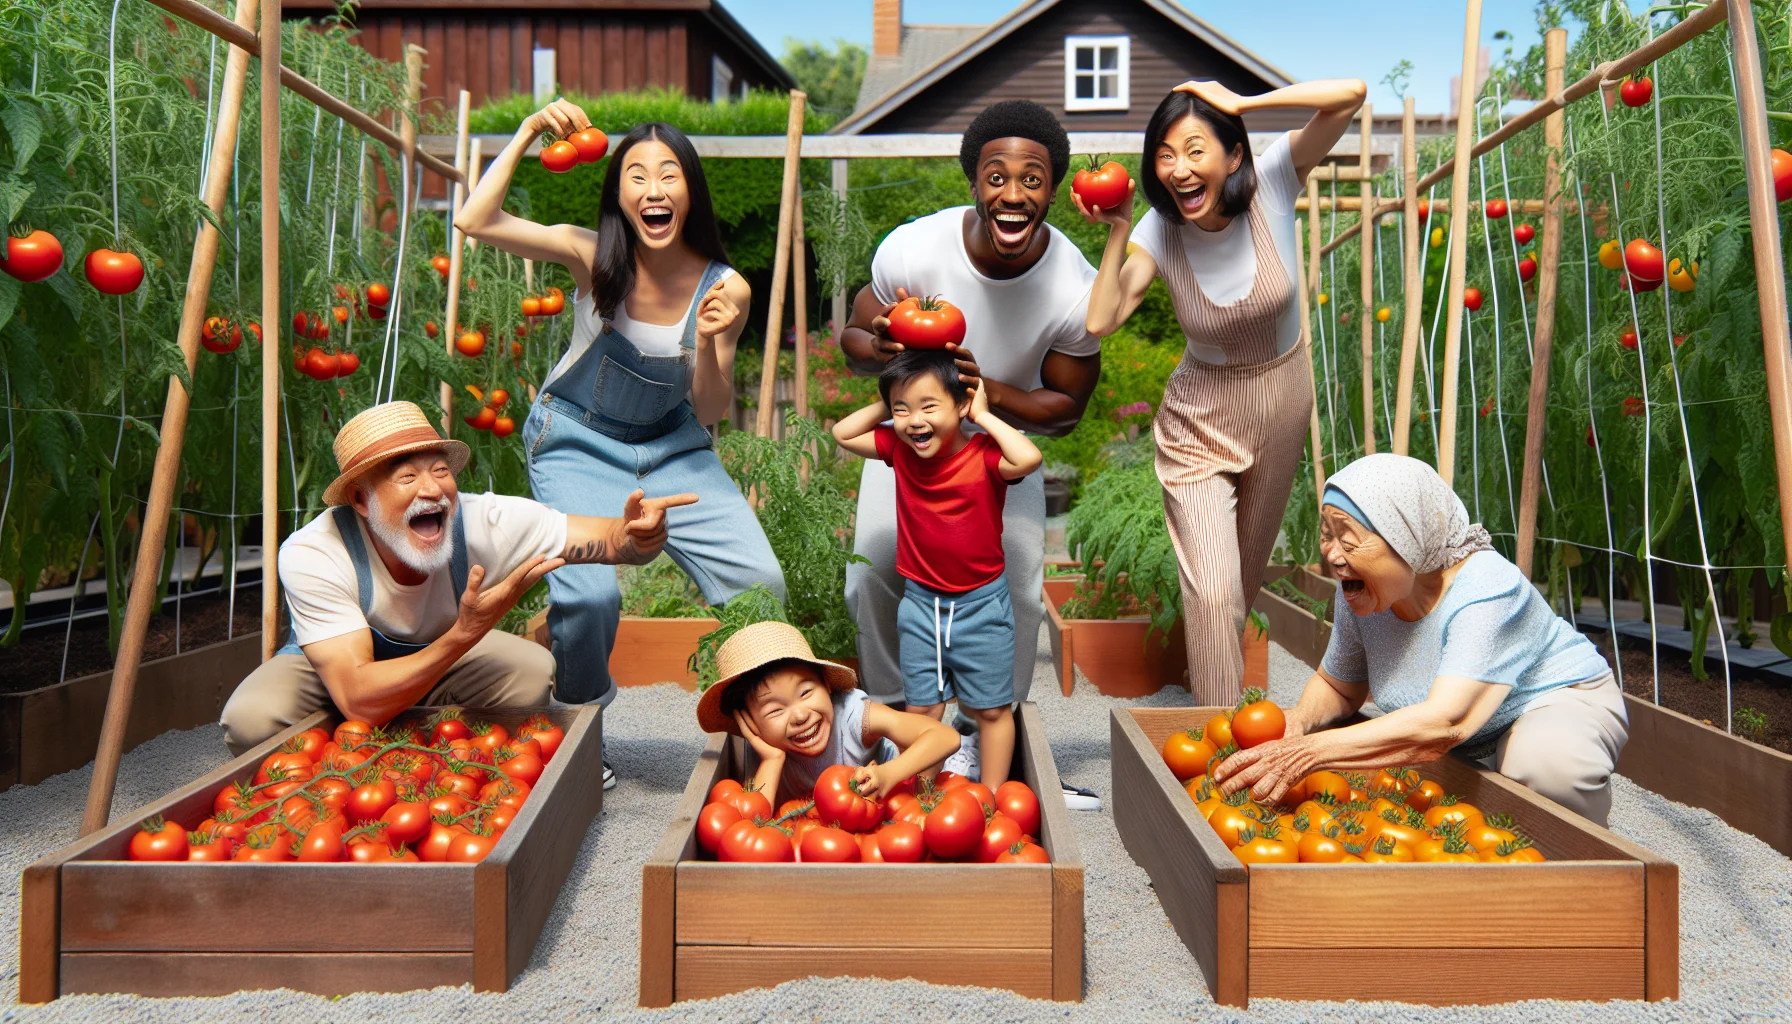 Imagine a comical and light-hearted scene of a diverse group of people enjoying a sunny day in their backyard garden. There are raised wooden beds flourishing with ripe, red tomatoes. An Asian woman and a black man are laughing as they kneel beside the beds, picking the plump, juicy fruits. A Middle-Eastern child is attempting to balance a tomato on his head with a cheeky grin, while an elderly Hispanic woman playfully scolds him. The image induces a sense of fun and playfulness, indirectly encouraging others to engage in such rewarding activities like gardening.